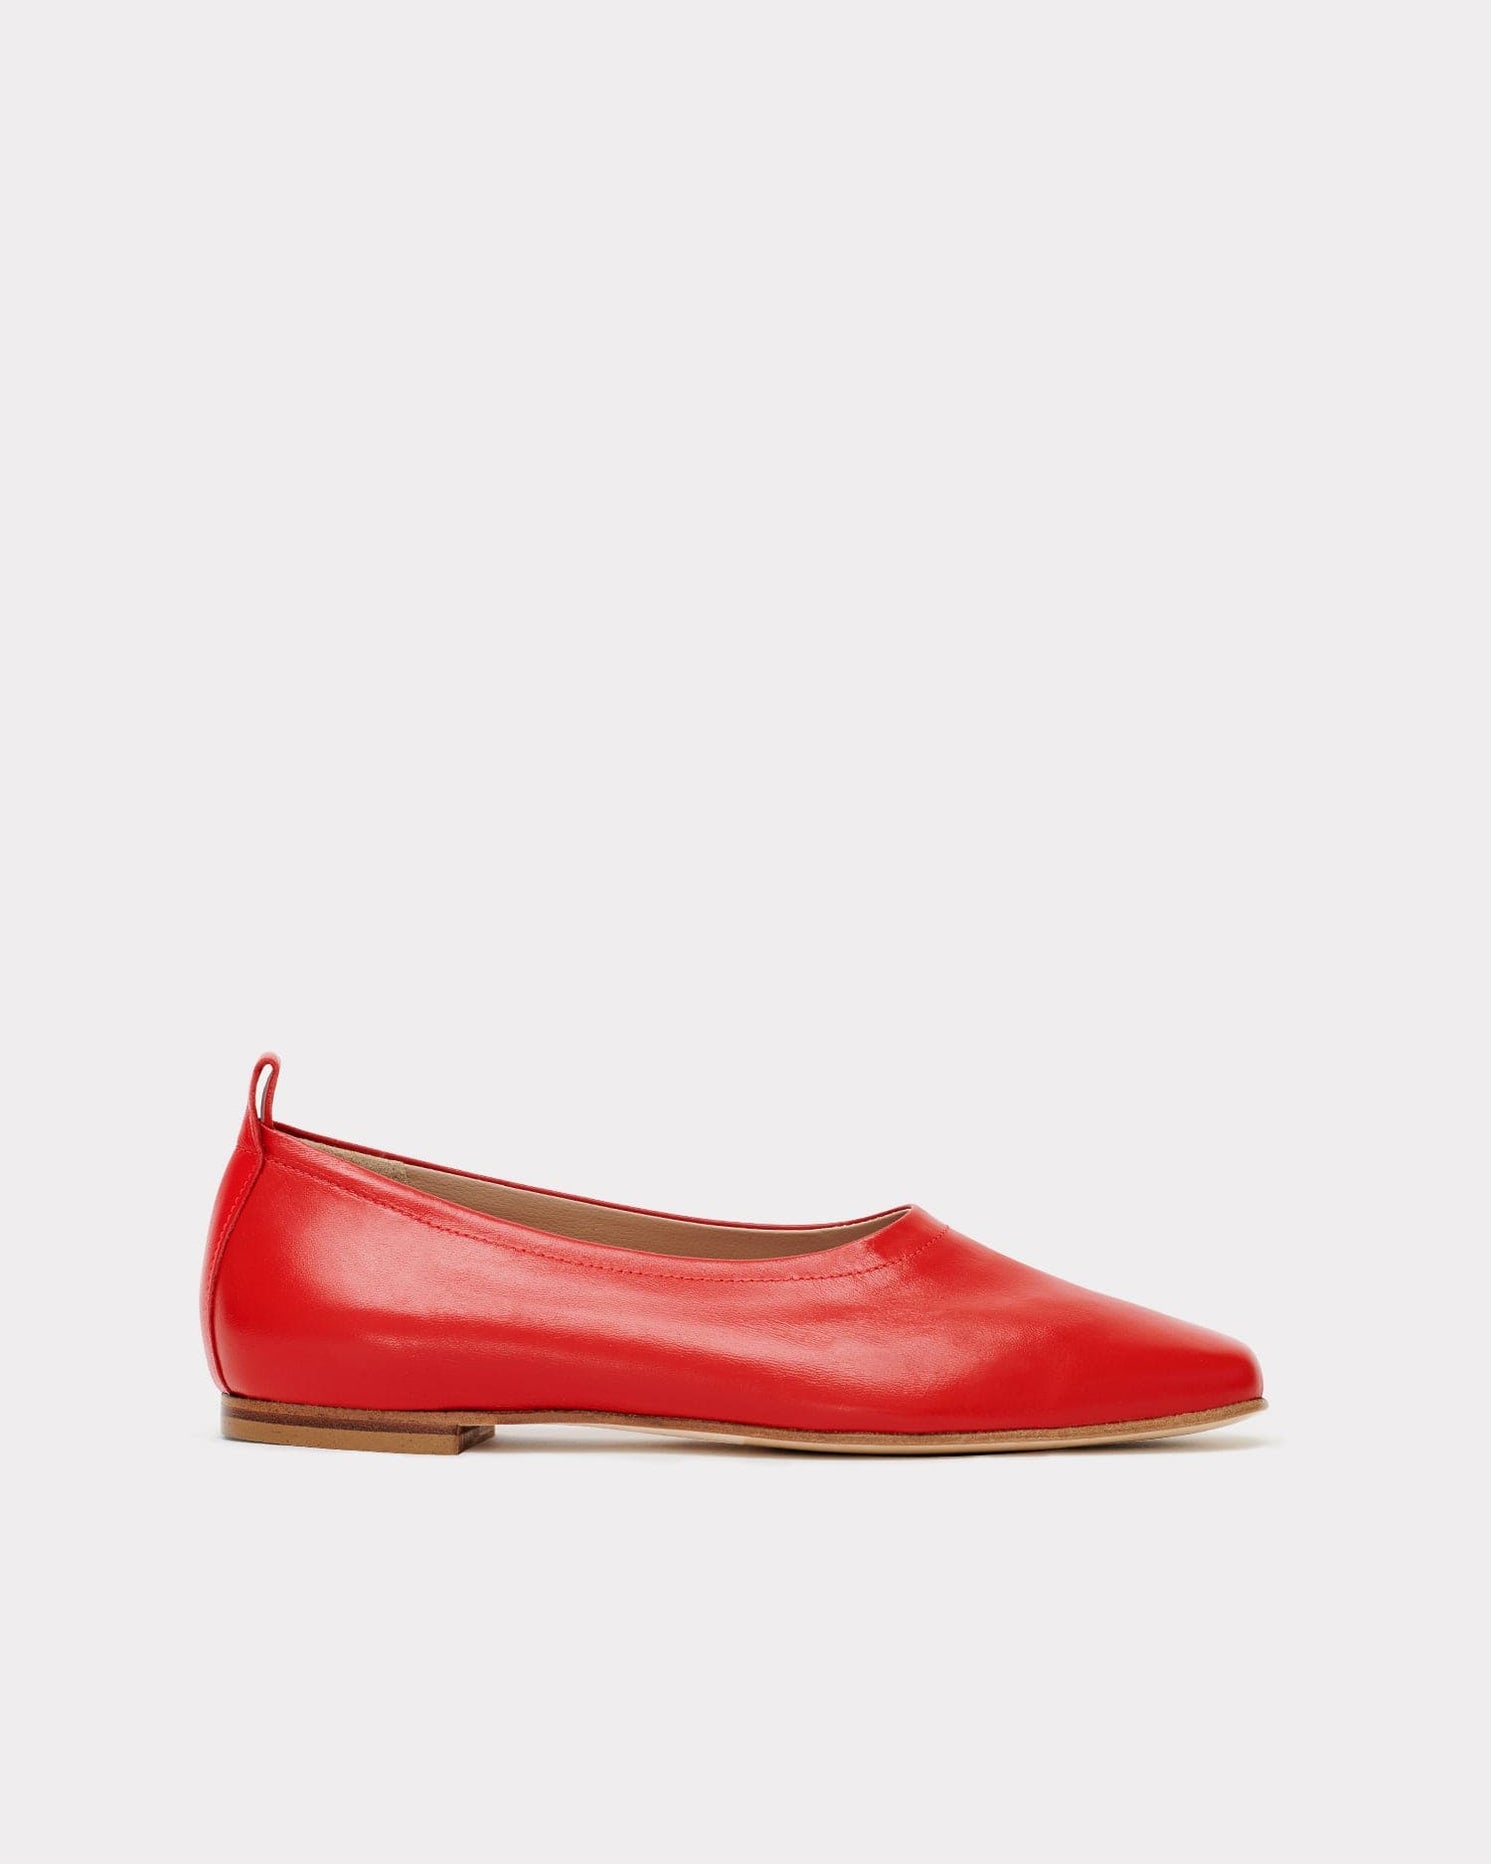 The Foundation Flat - Red Ballet Flats | Italian Leather Shoes– ESSĒN